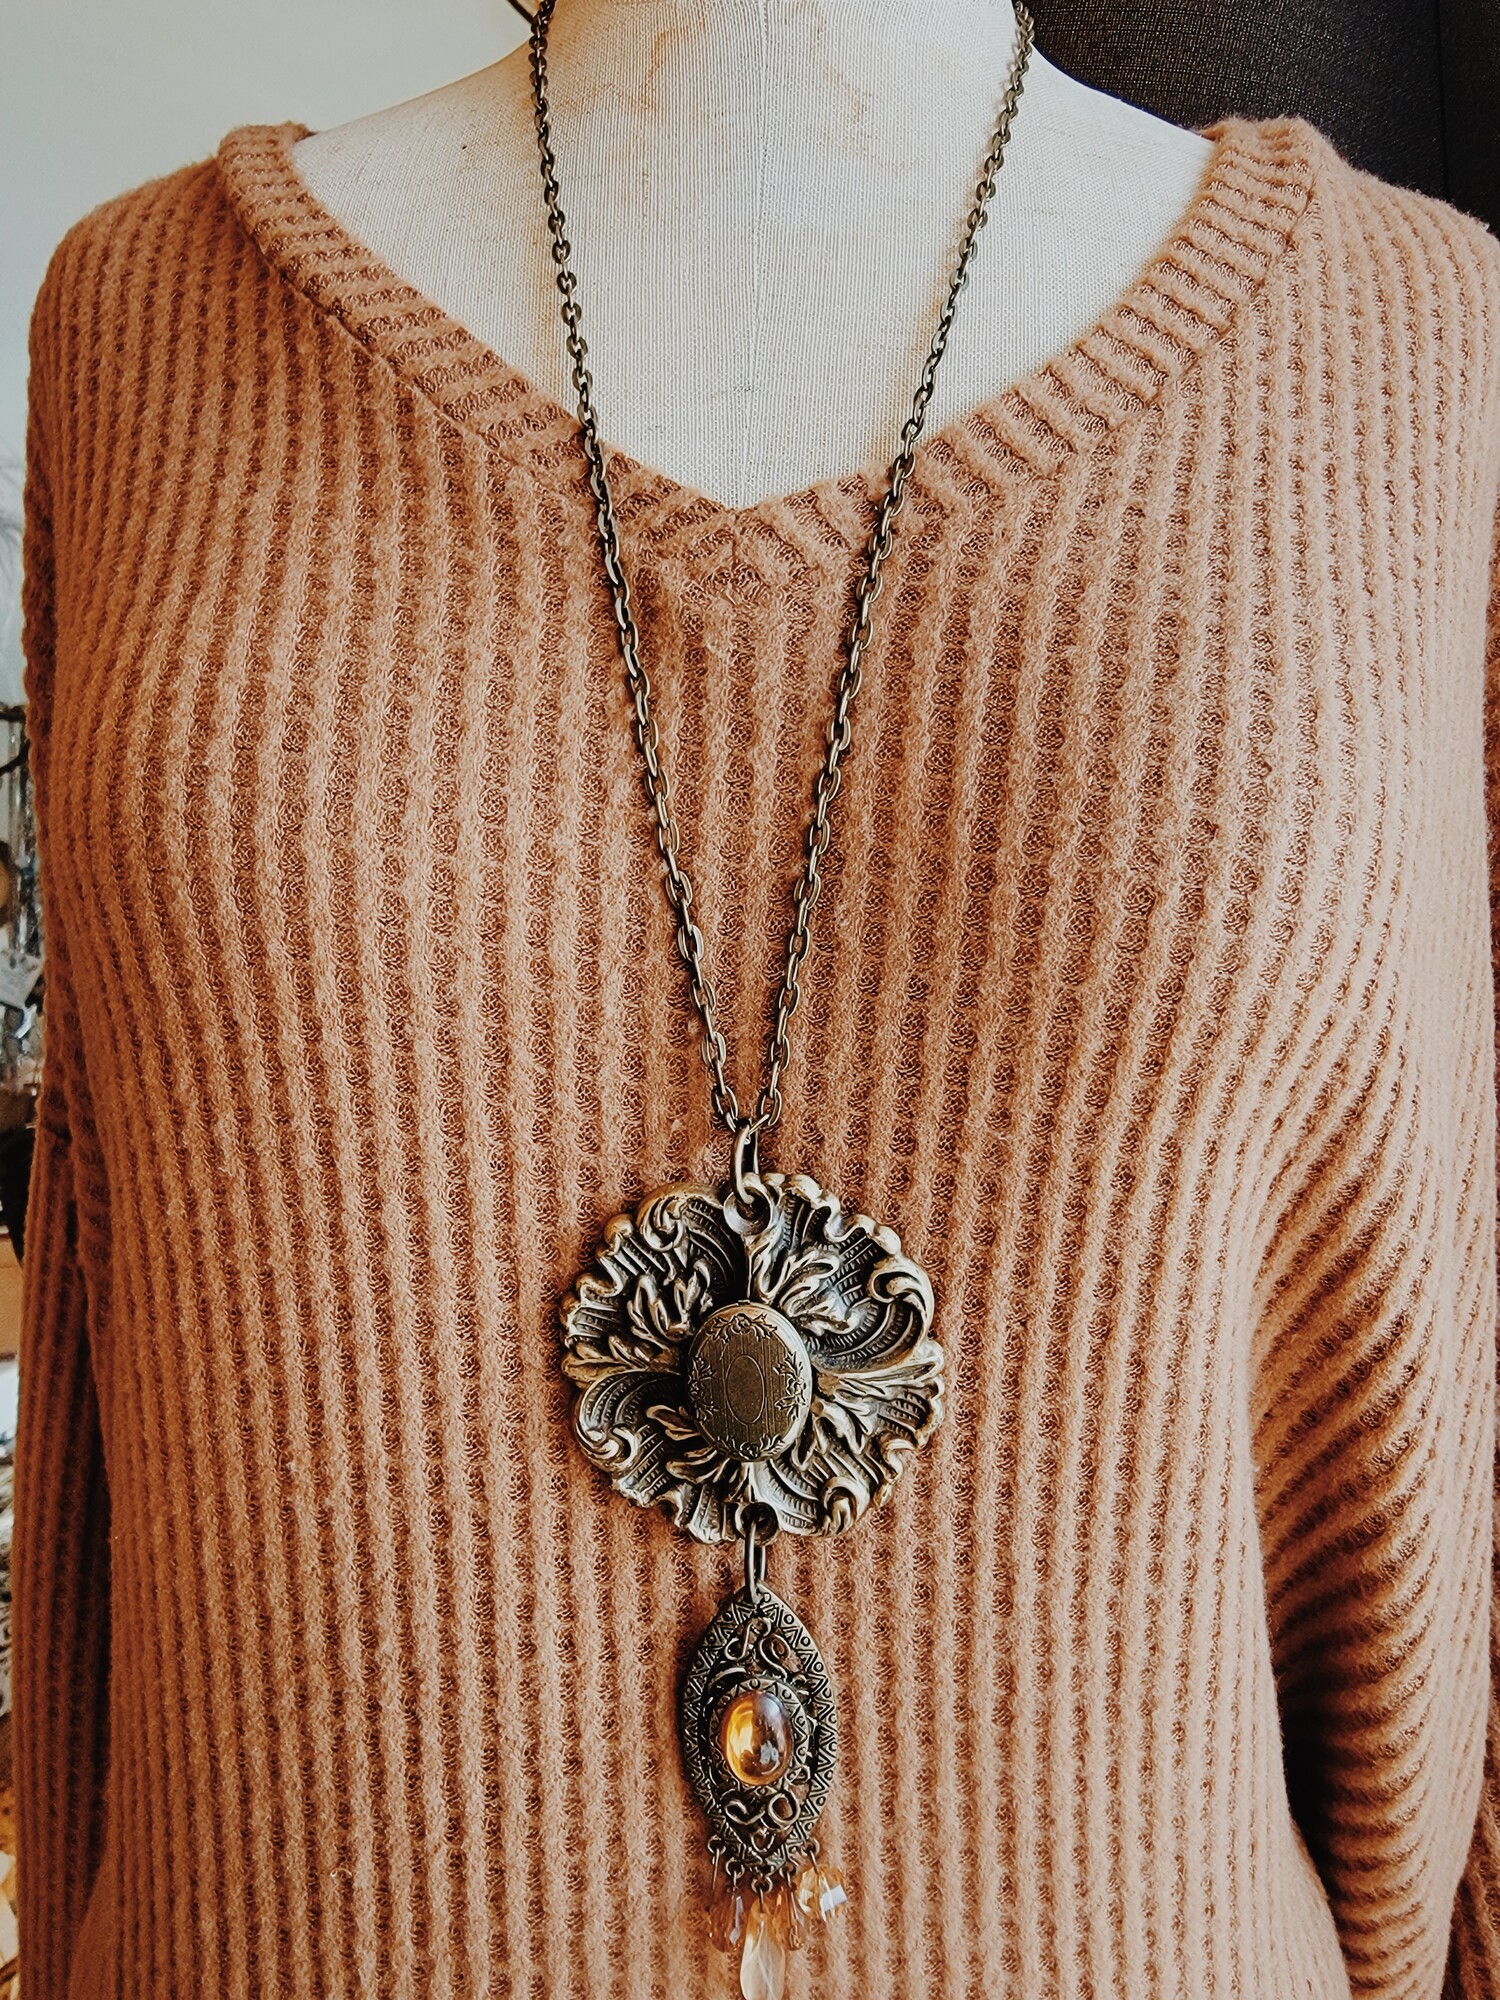 - Hand crafted necklace
- 30 inch chain
- Brass flower pendant with locket center
- Brass charm hanging from pendant with orange tone stones